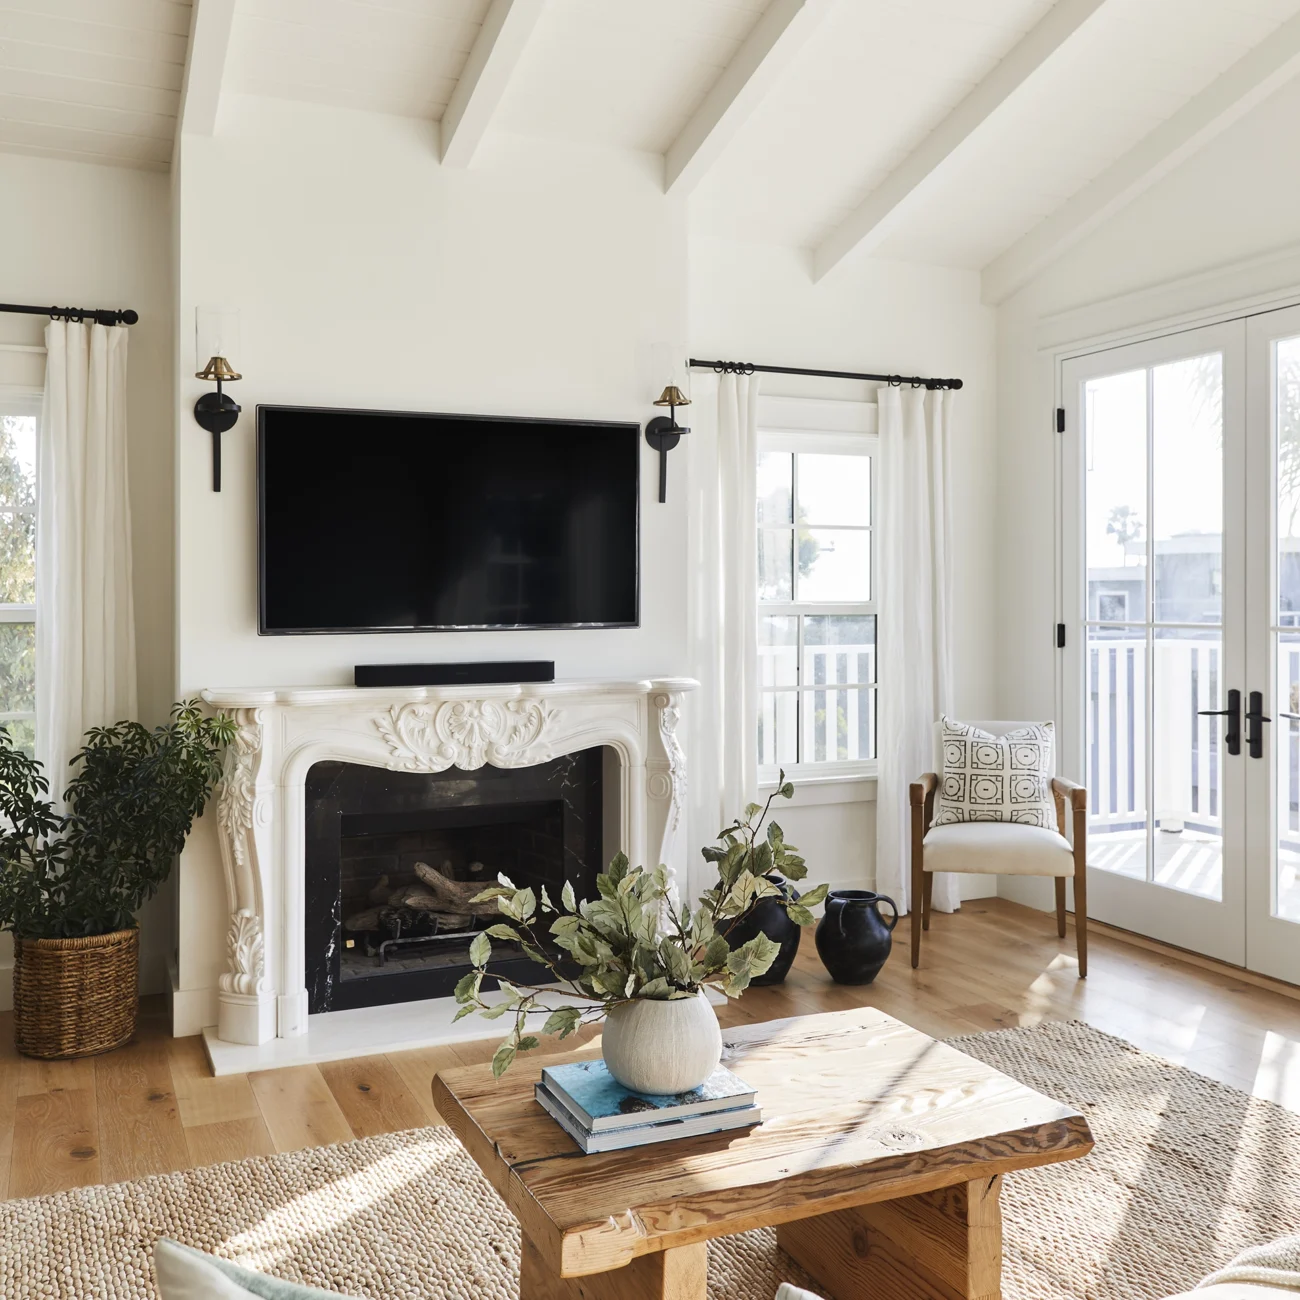 Christine Vroom Interiors | Gentry | Bright, white living room with vaulted ceilings and molded fireplace encasement